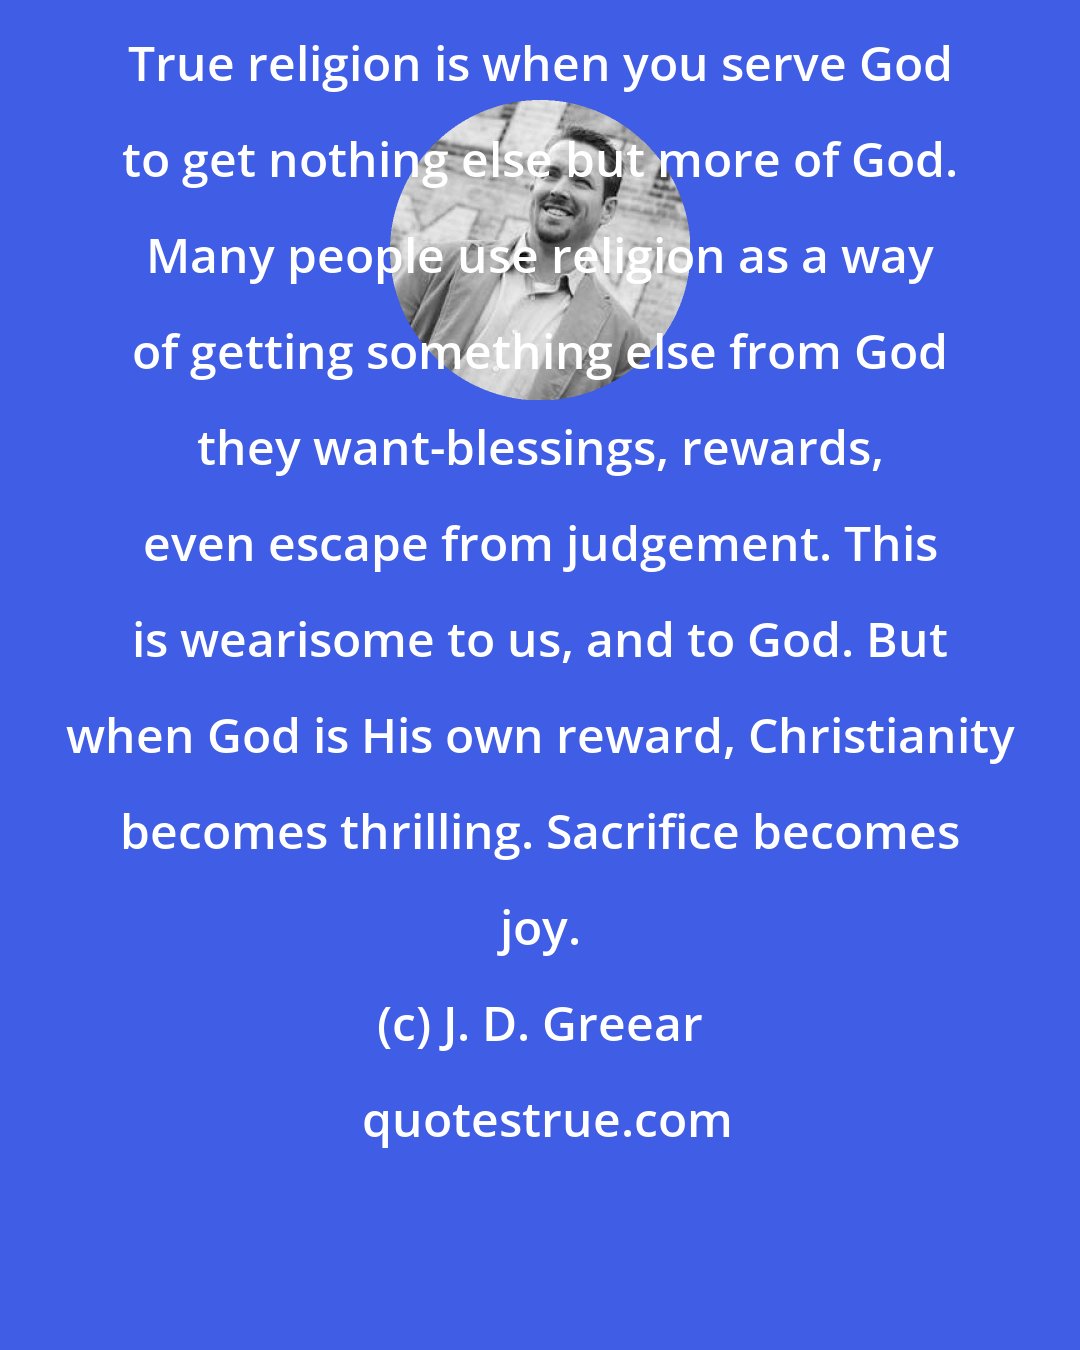 J. D. Greear: True religion is when you serve God to get nothing else but more of God. Many people use religion as a way of getting something else from God they want-blessings, rewards, even escape from judgement. This is wearisome to us, and to God. But when God is His own reward, Christianity becomes thrilling. Sacrifice becomes joy.